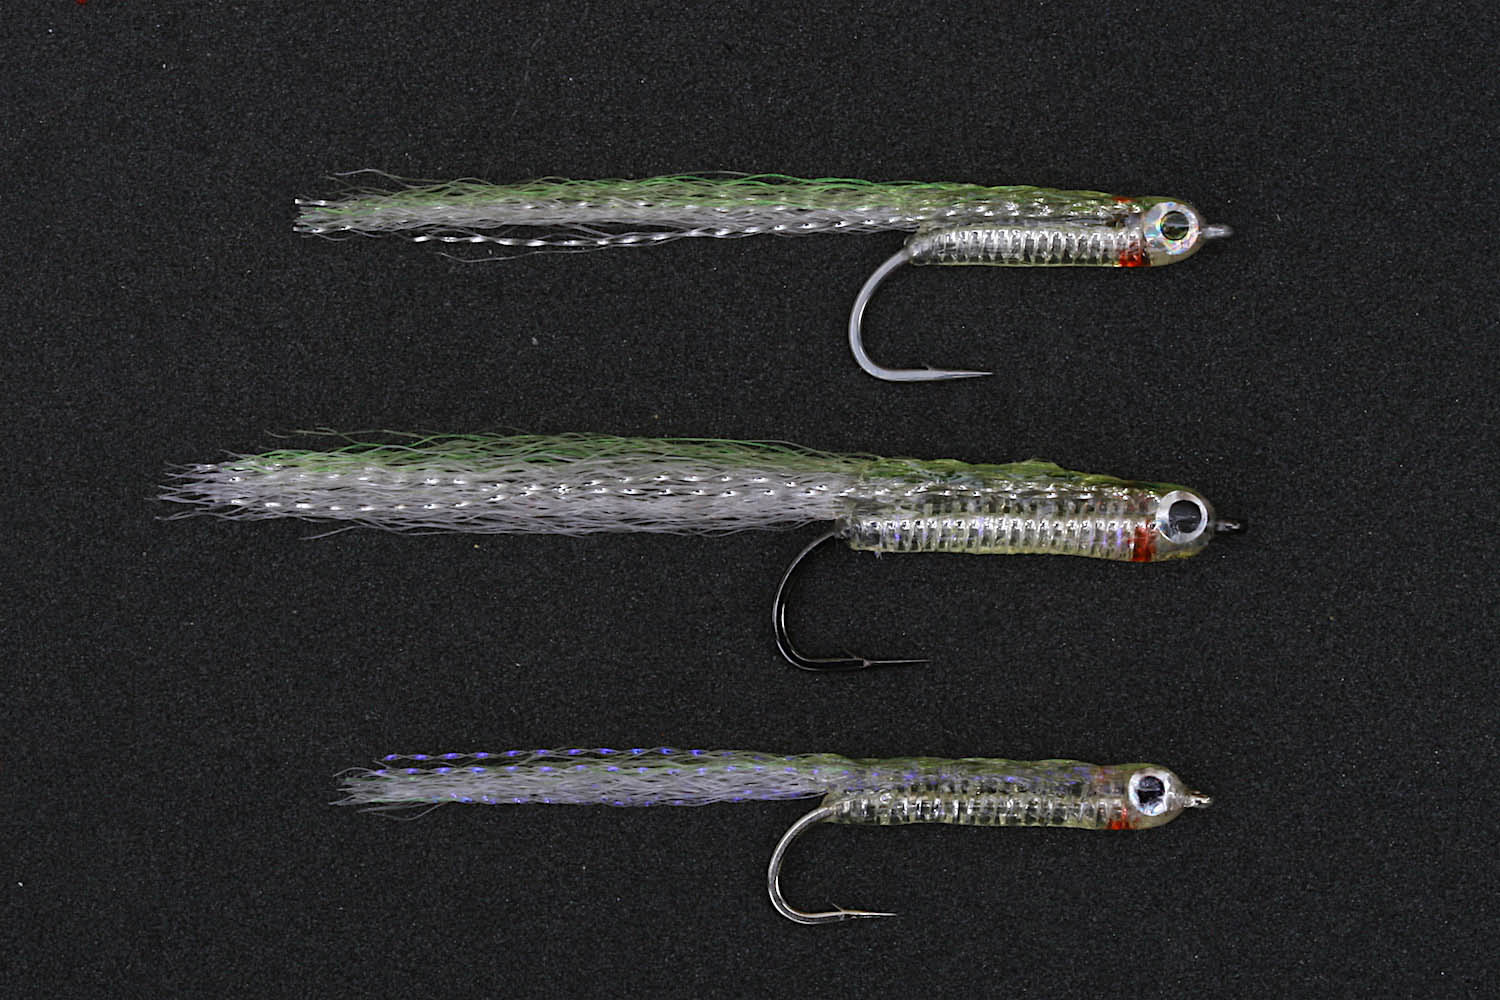 Three different sizes of the jelly belly minnow fly